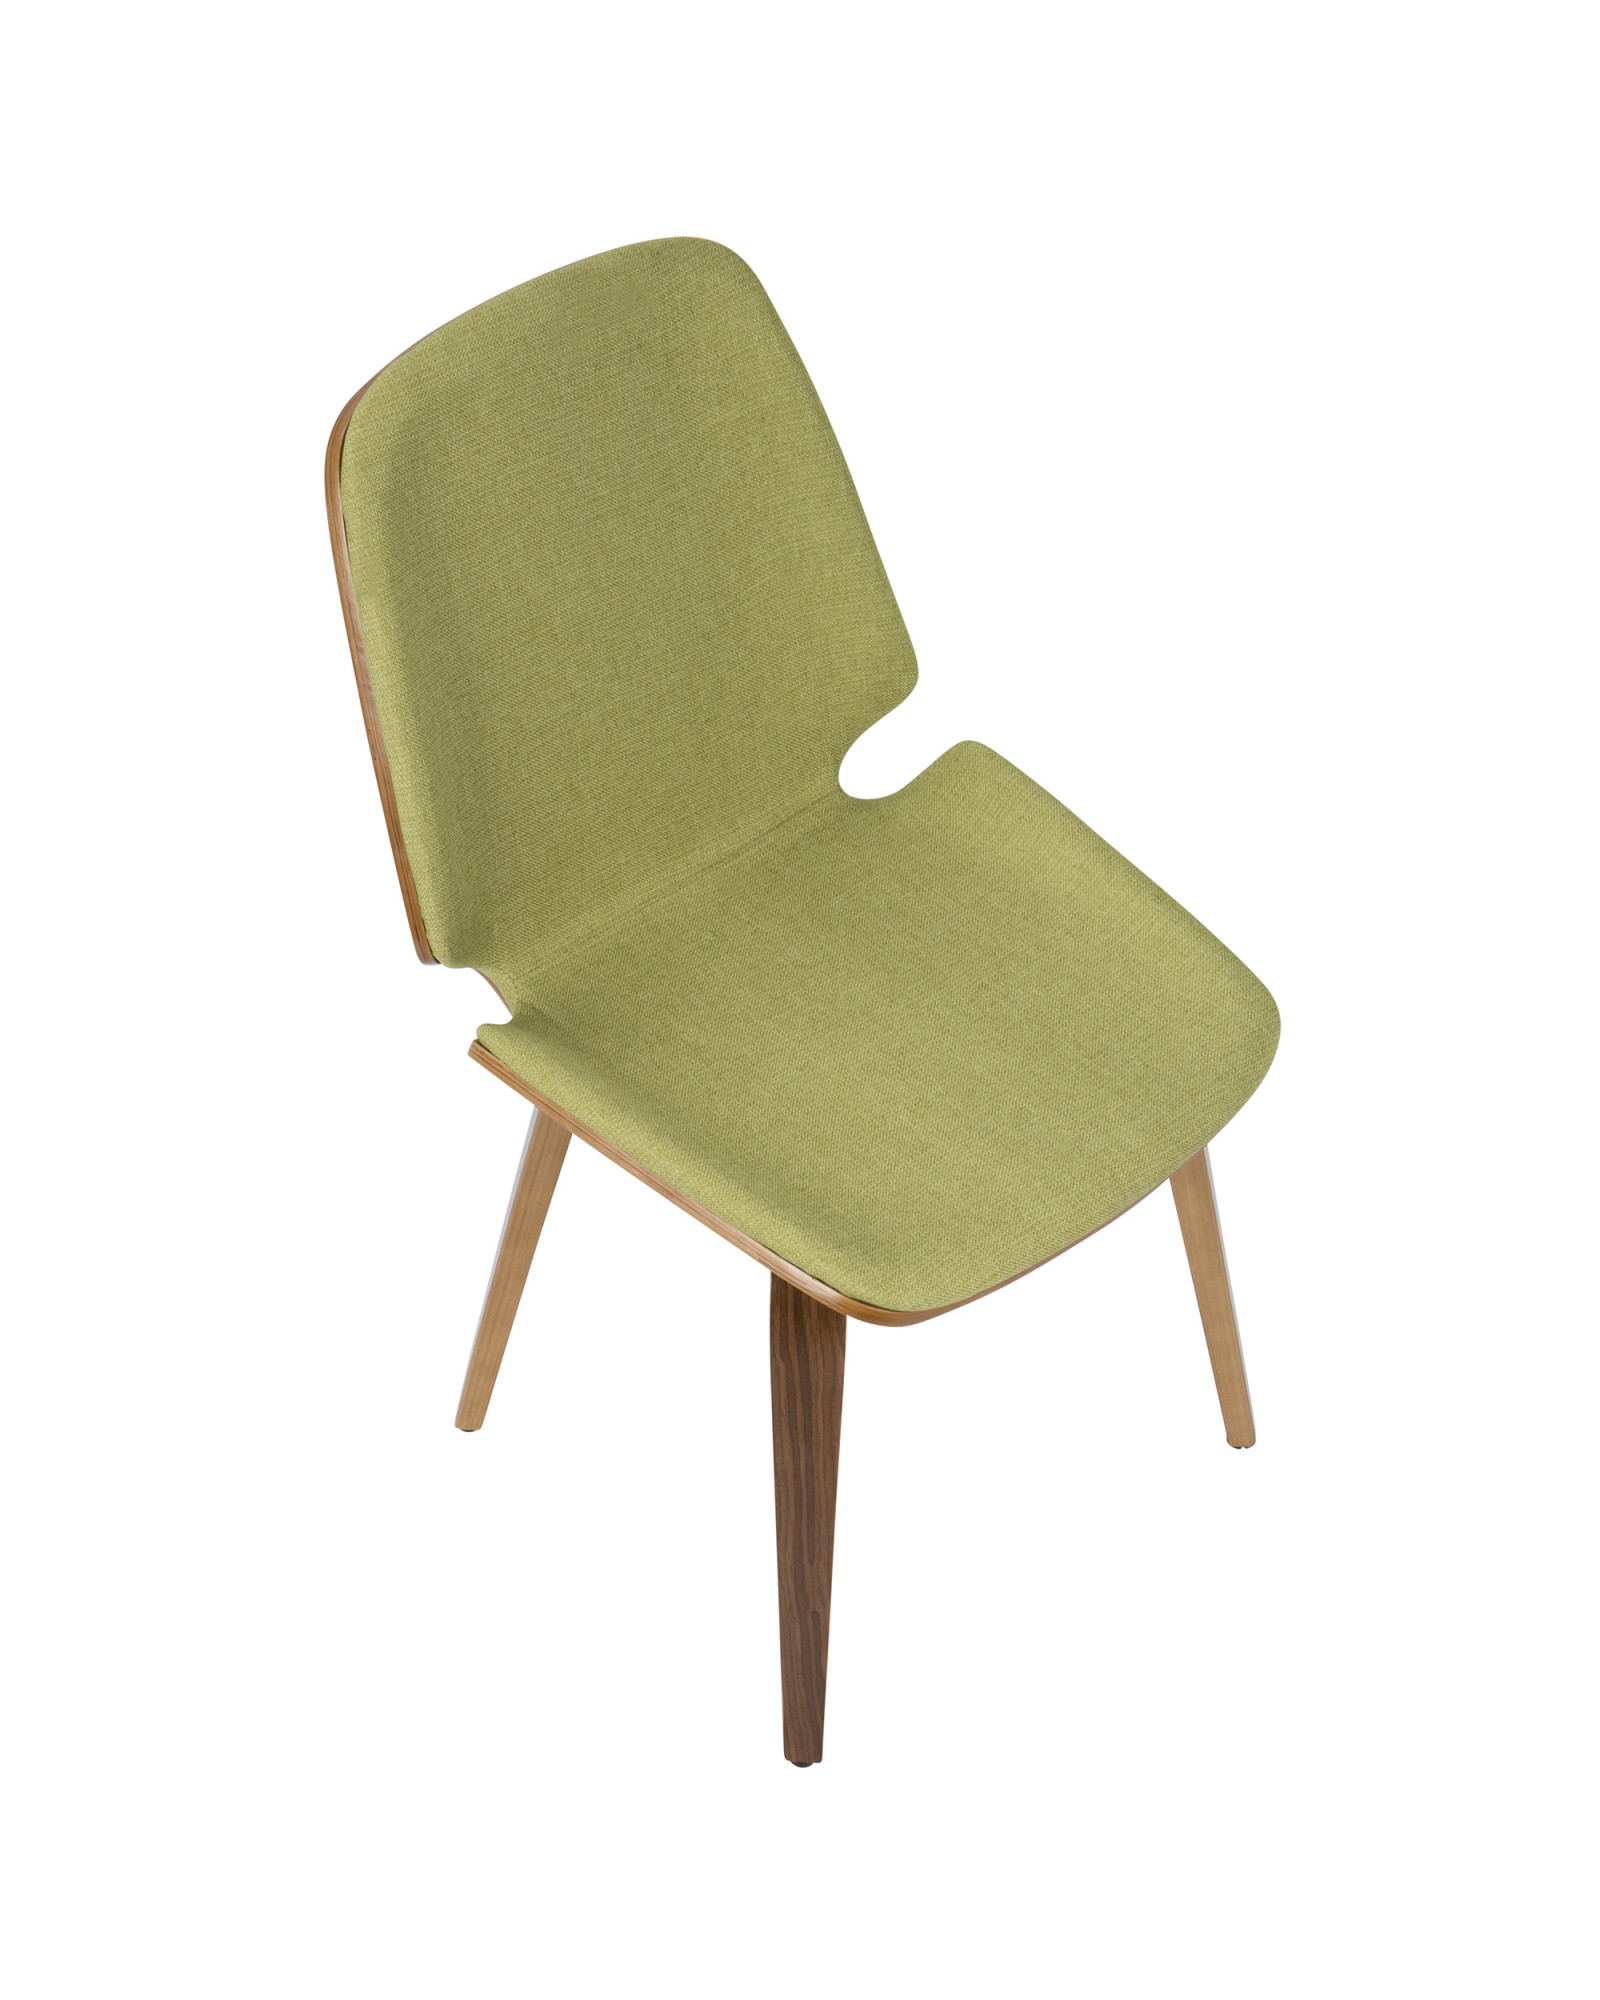 Serena Mid-Century Modern Dining Chair in Walnut with Green Fabric - Set of 2